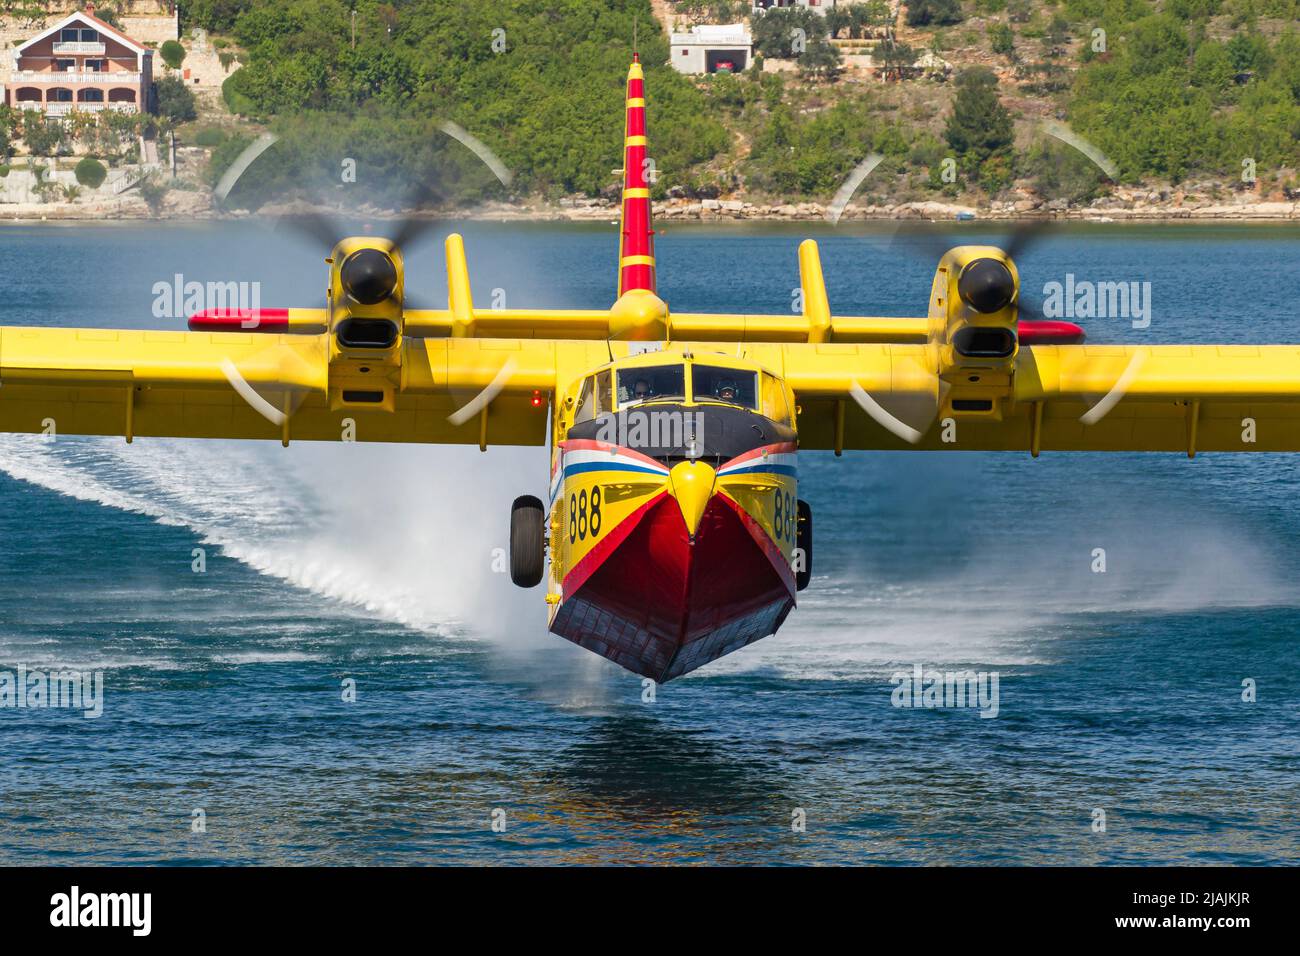 A Croatian Air Force CL-415 Super Scooper firefighting aircraft taking off from the water, Croatia. Stock Photo